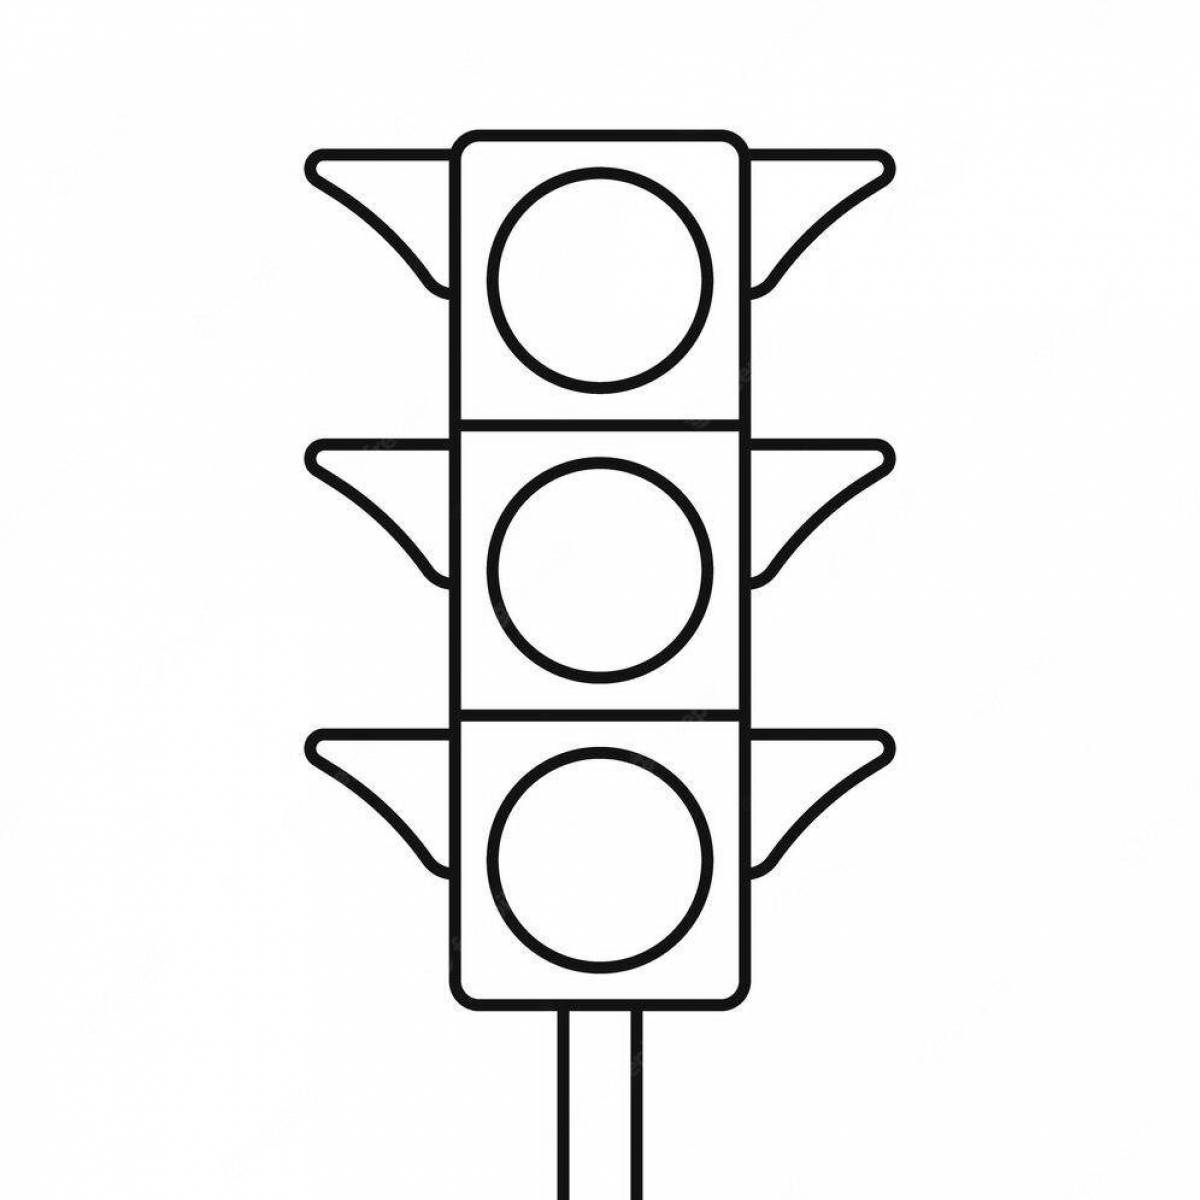 Animated traffic light for pedestrians